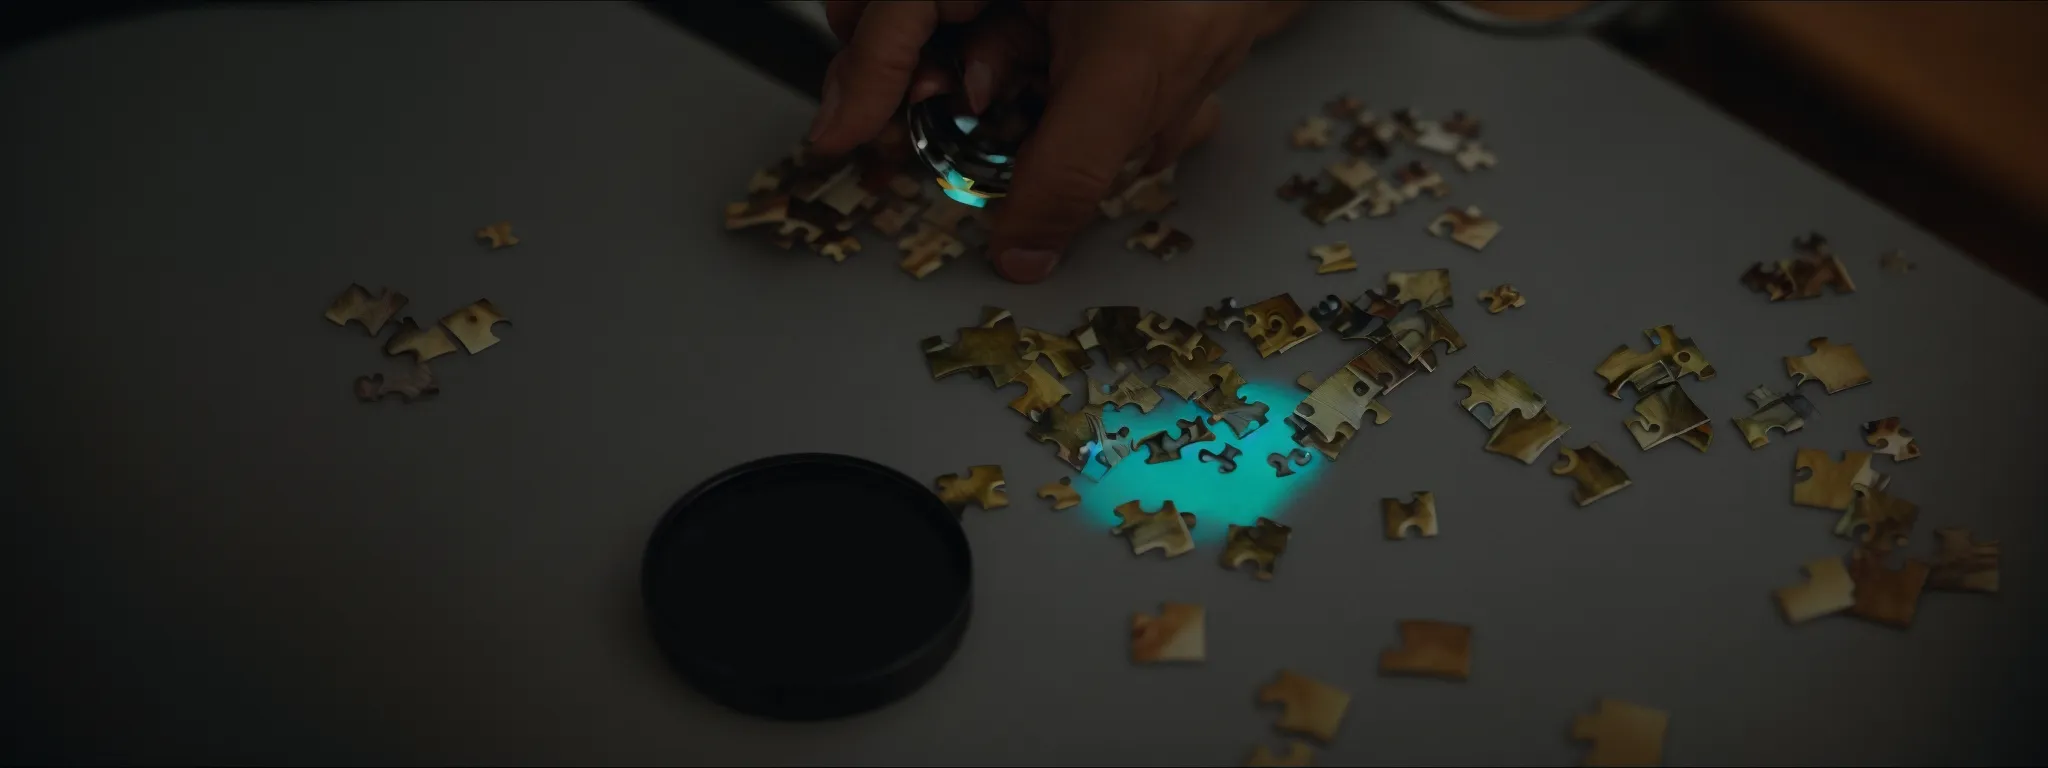 a person looking through a magnifying glass at a jigsaw puzzle, with some pieces glowing to represent valuable findings.